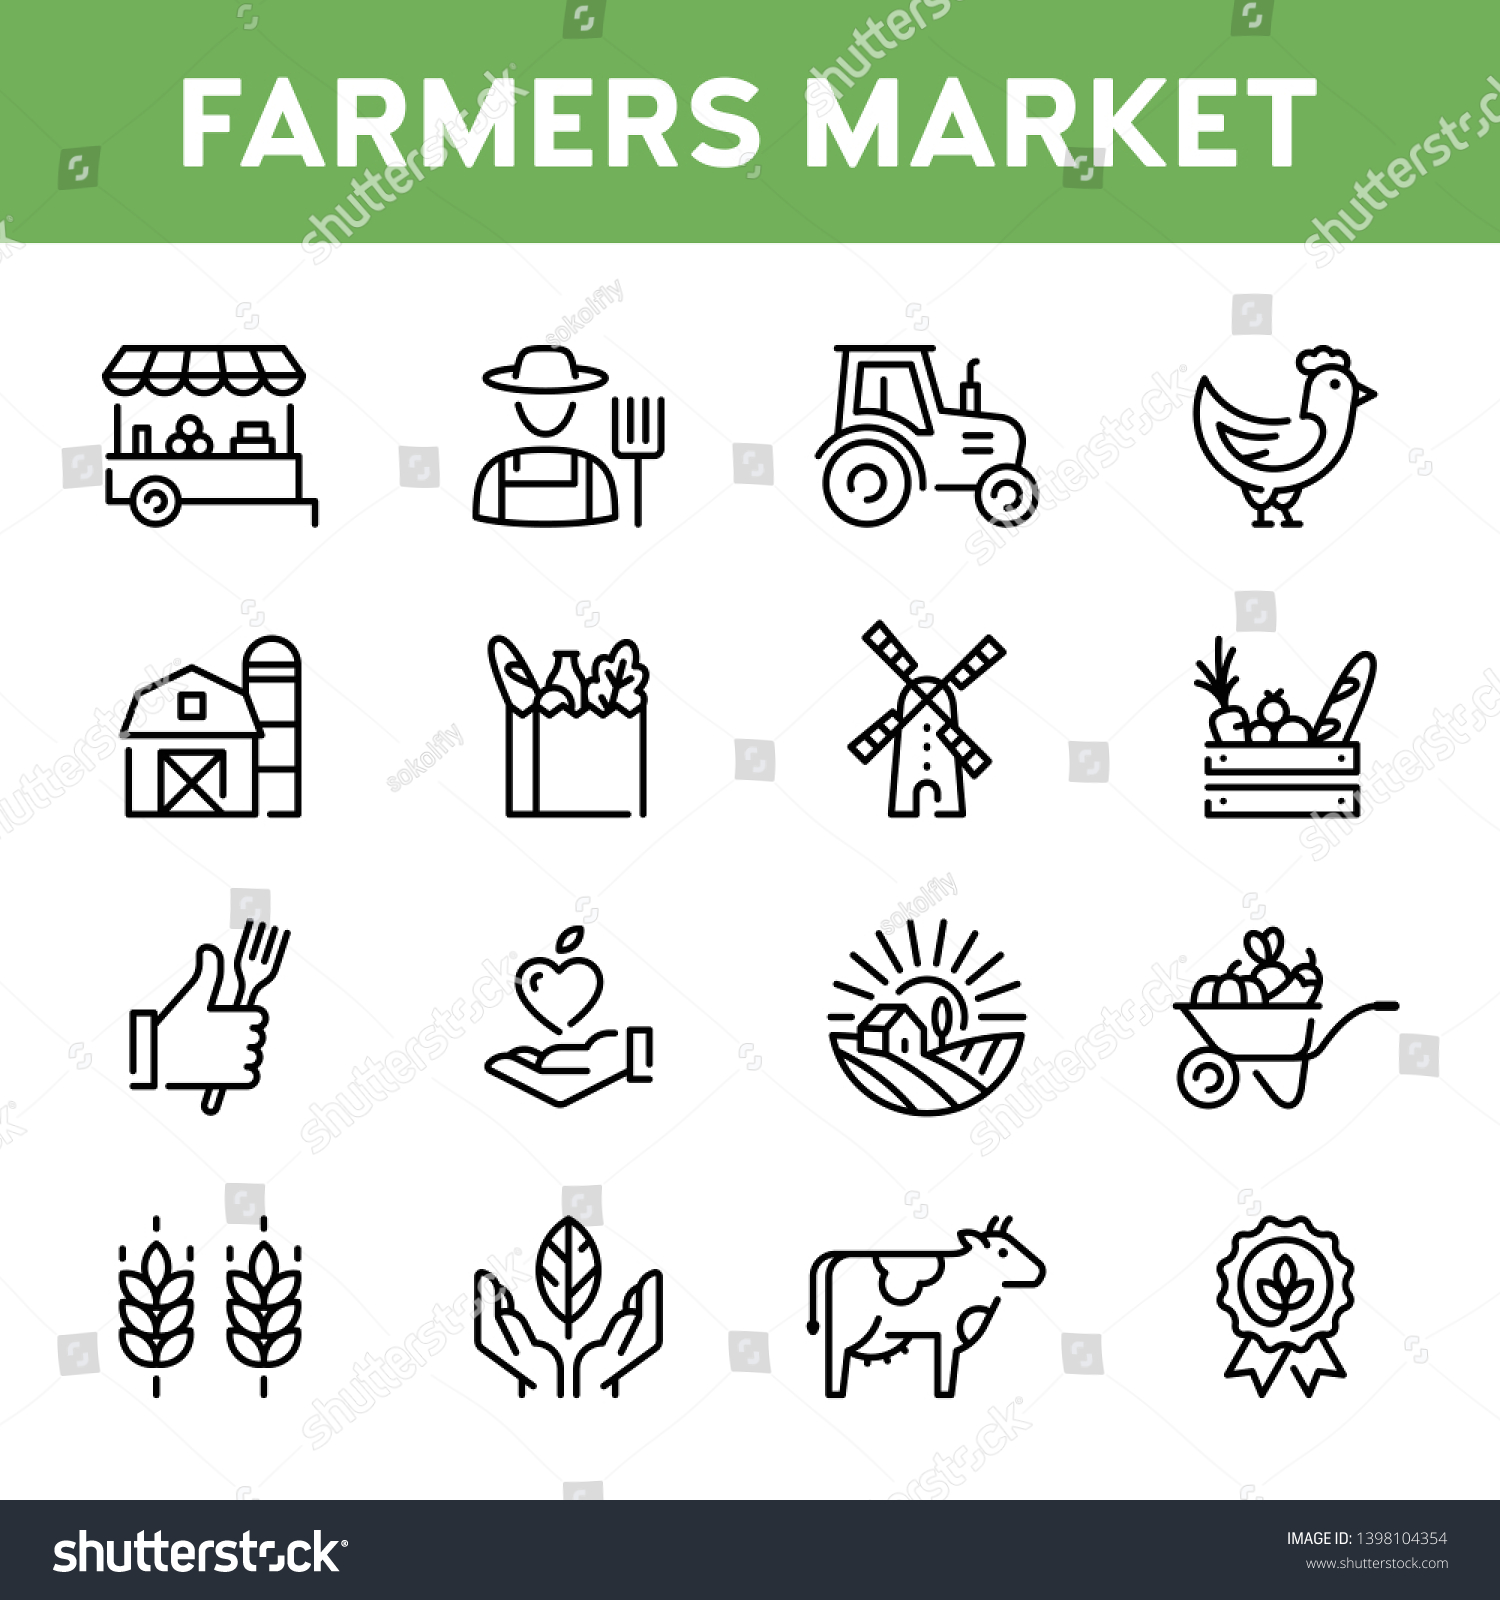 Vector farmers market icon set. Modern agriculture logo symbol collection. Organic farming pictogram illustration in line style. Eco, bio, natural signs for local food shop, healthy fresh products #1398104354